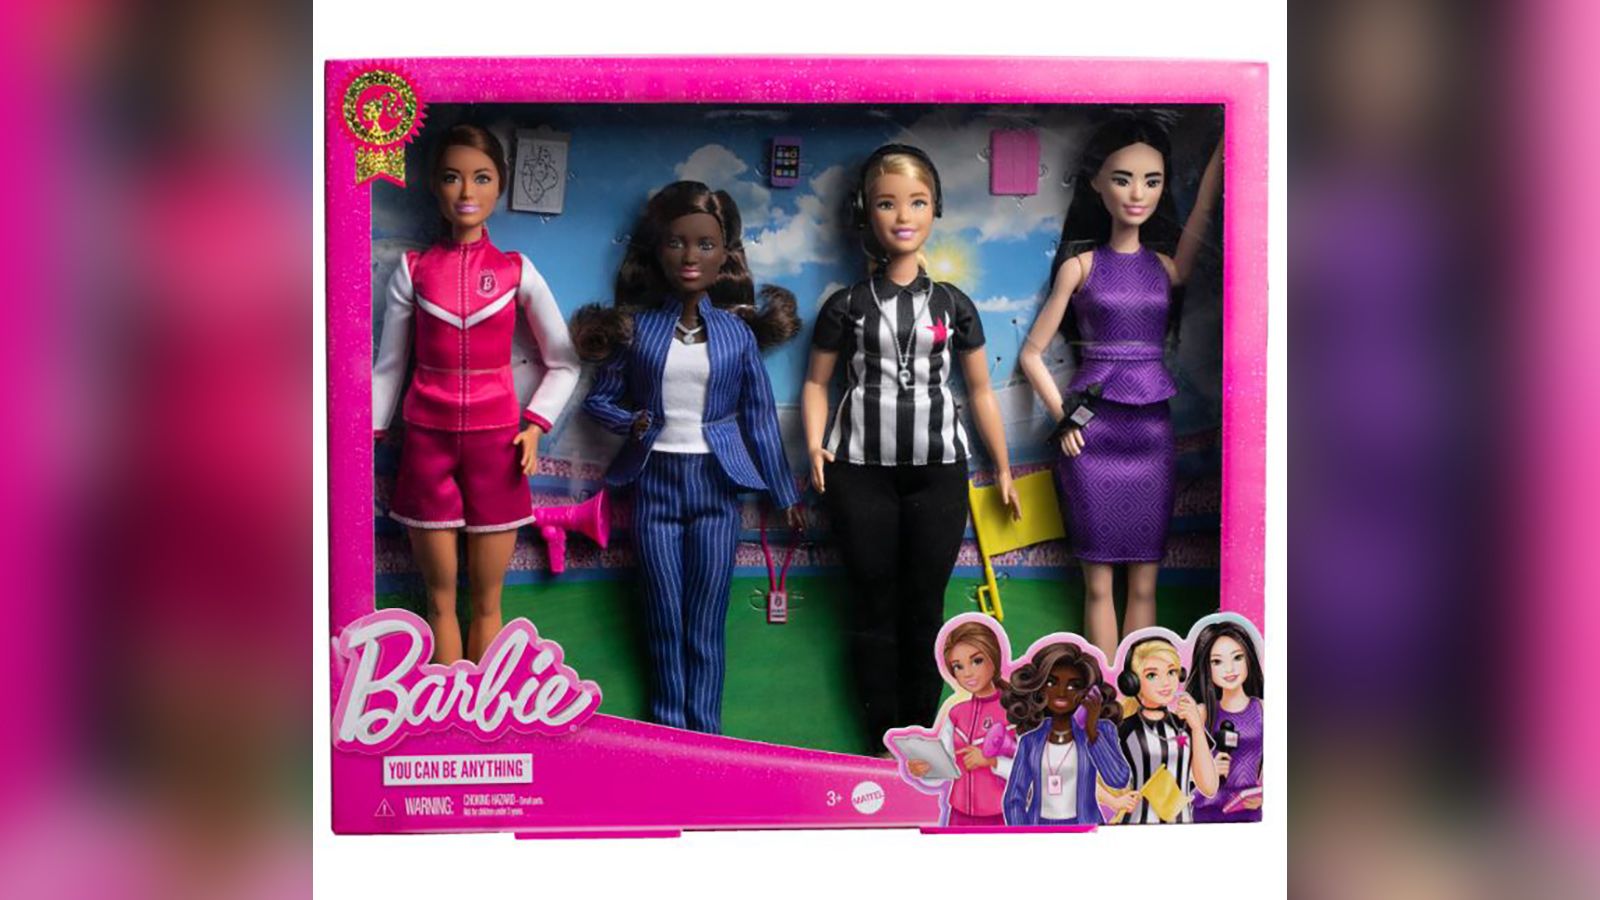 In a Barbie world: Experts weigh in on Barbie's legacy ahead of